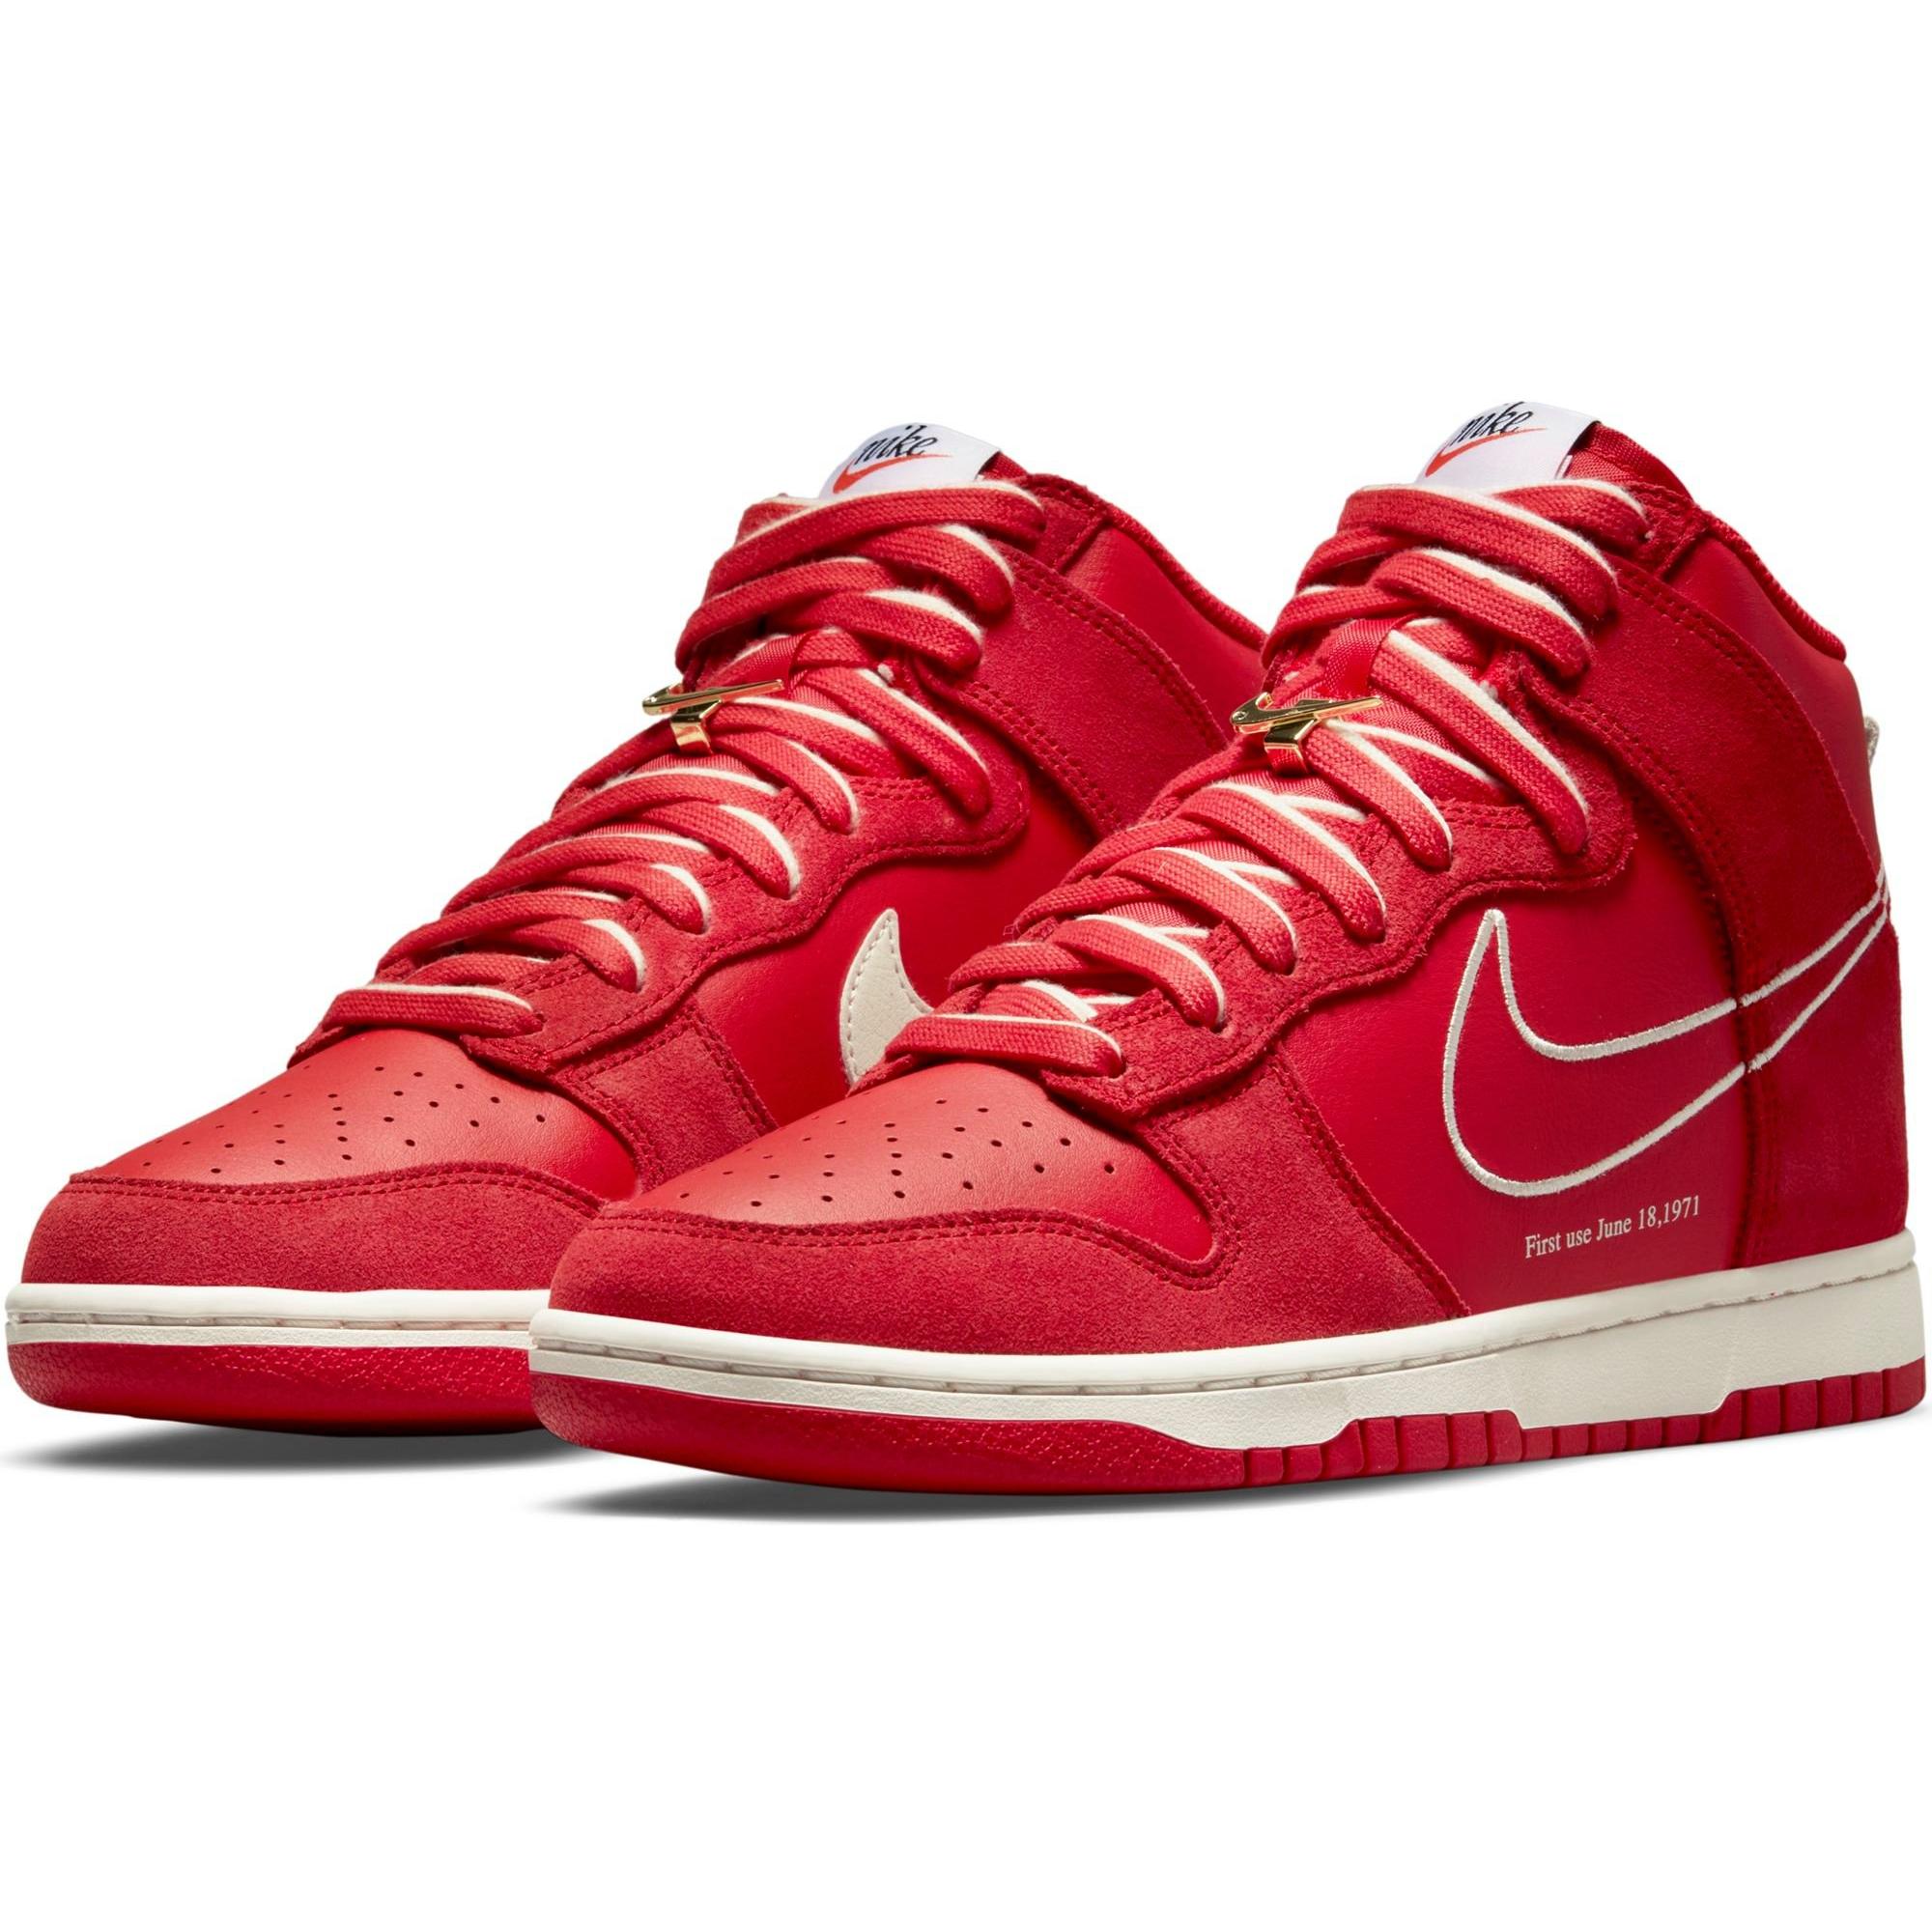 Sneakers Release – Nike Dunk High SE “First Use” University Red 